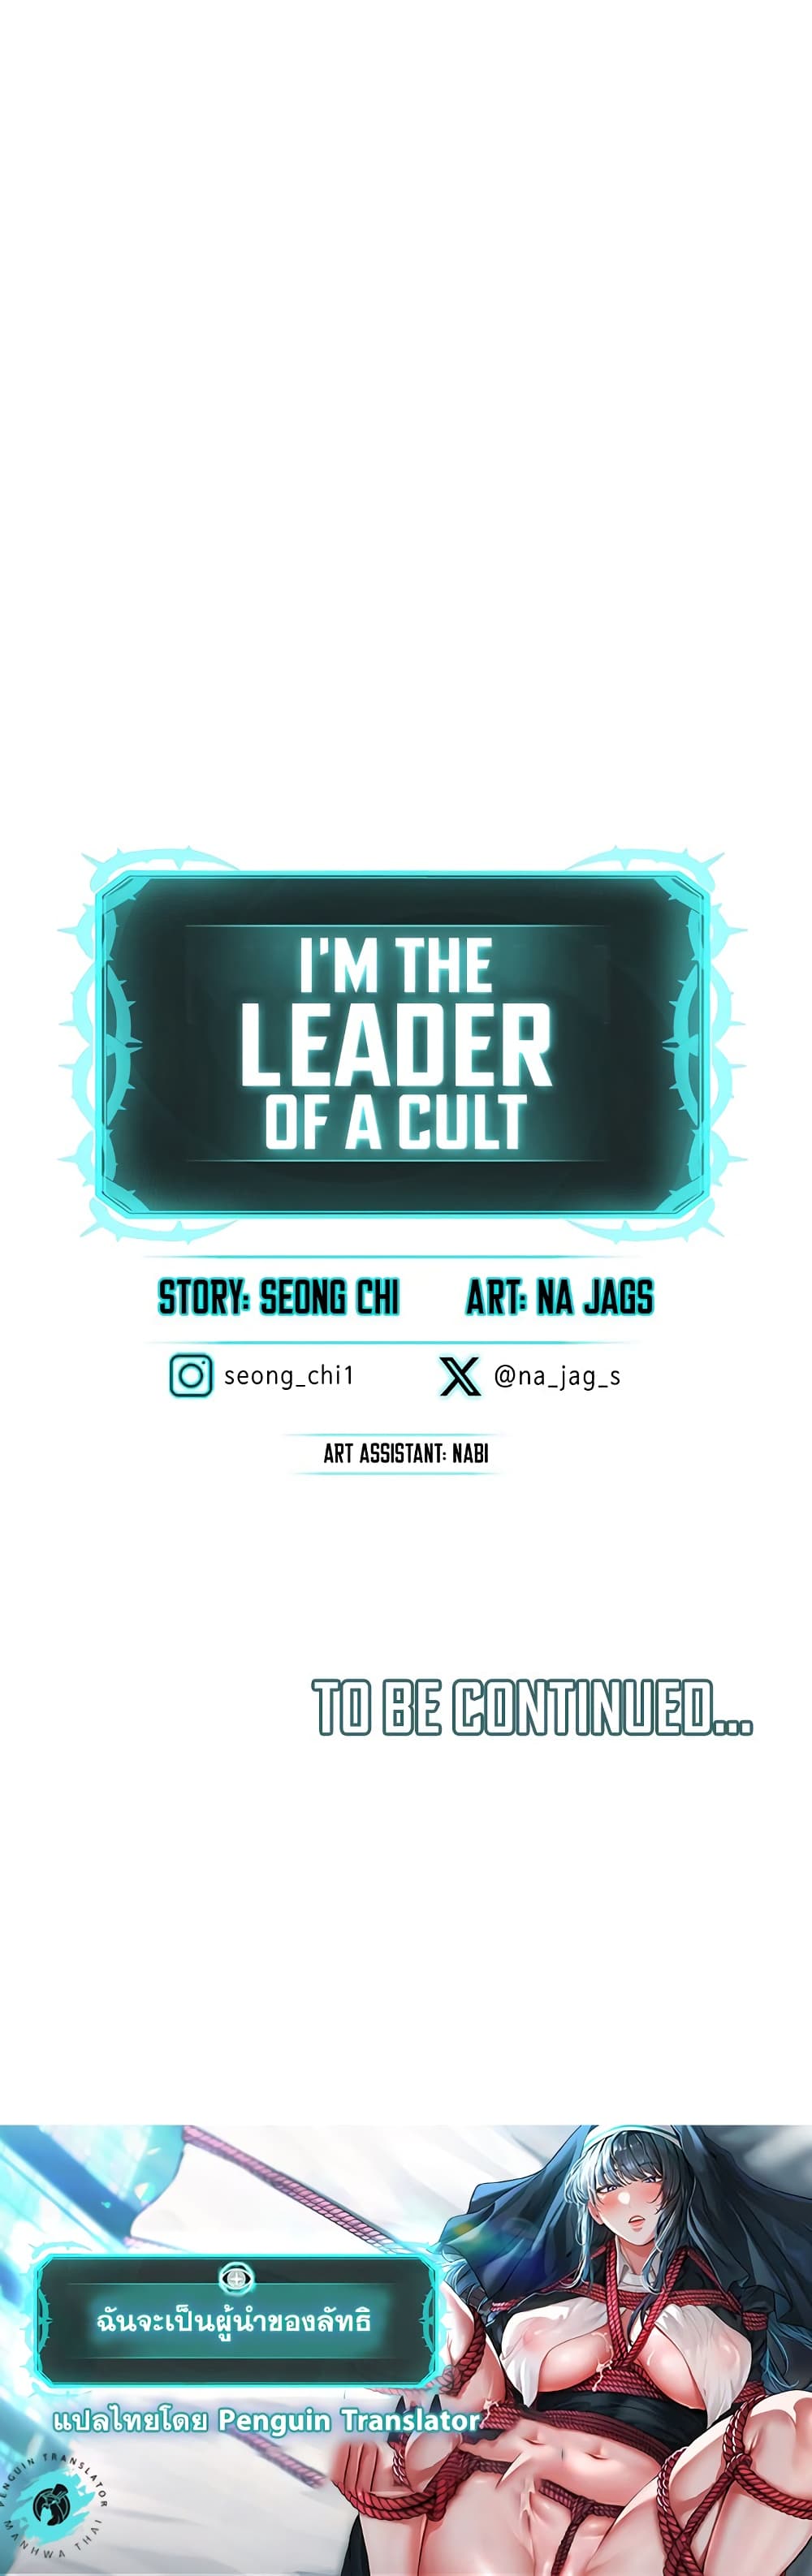 I’m The Leader Of A Cult 2-2